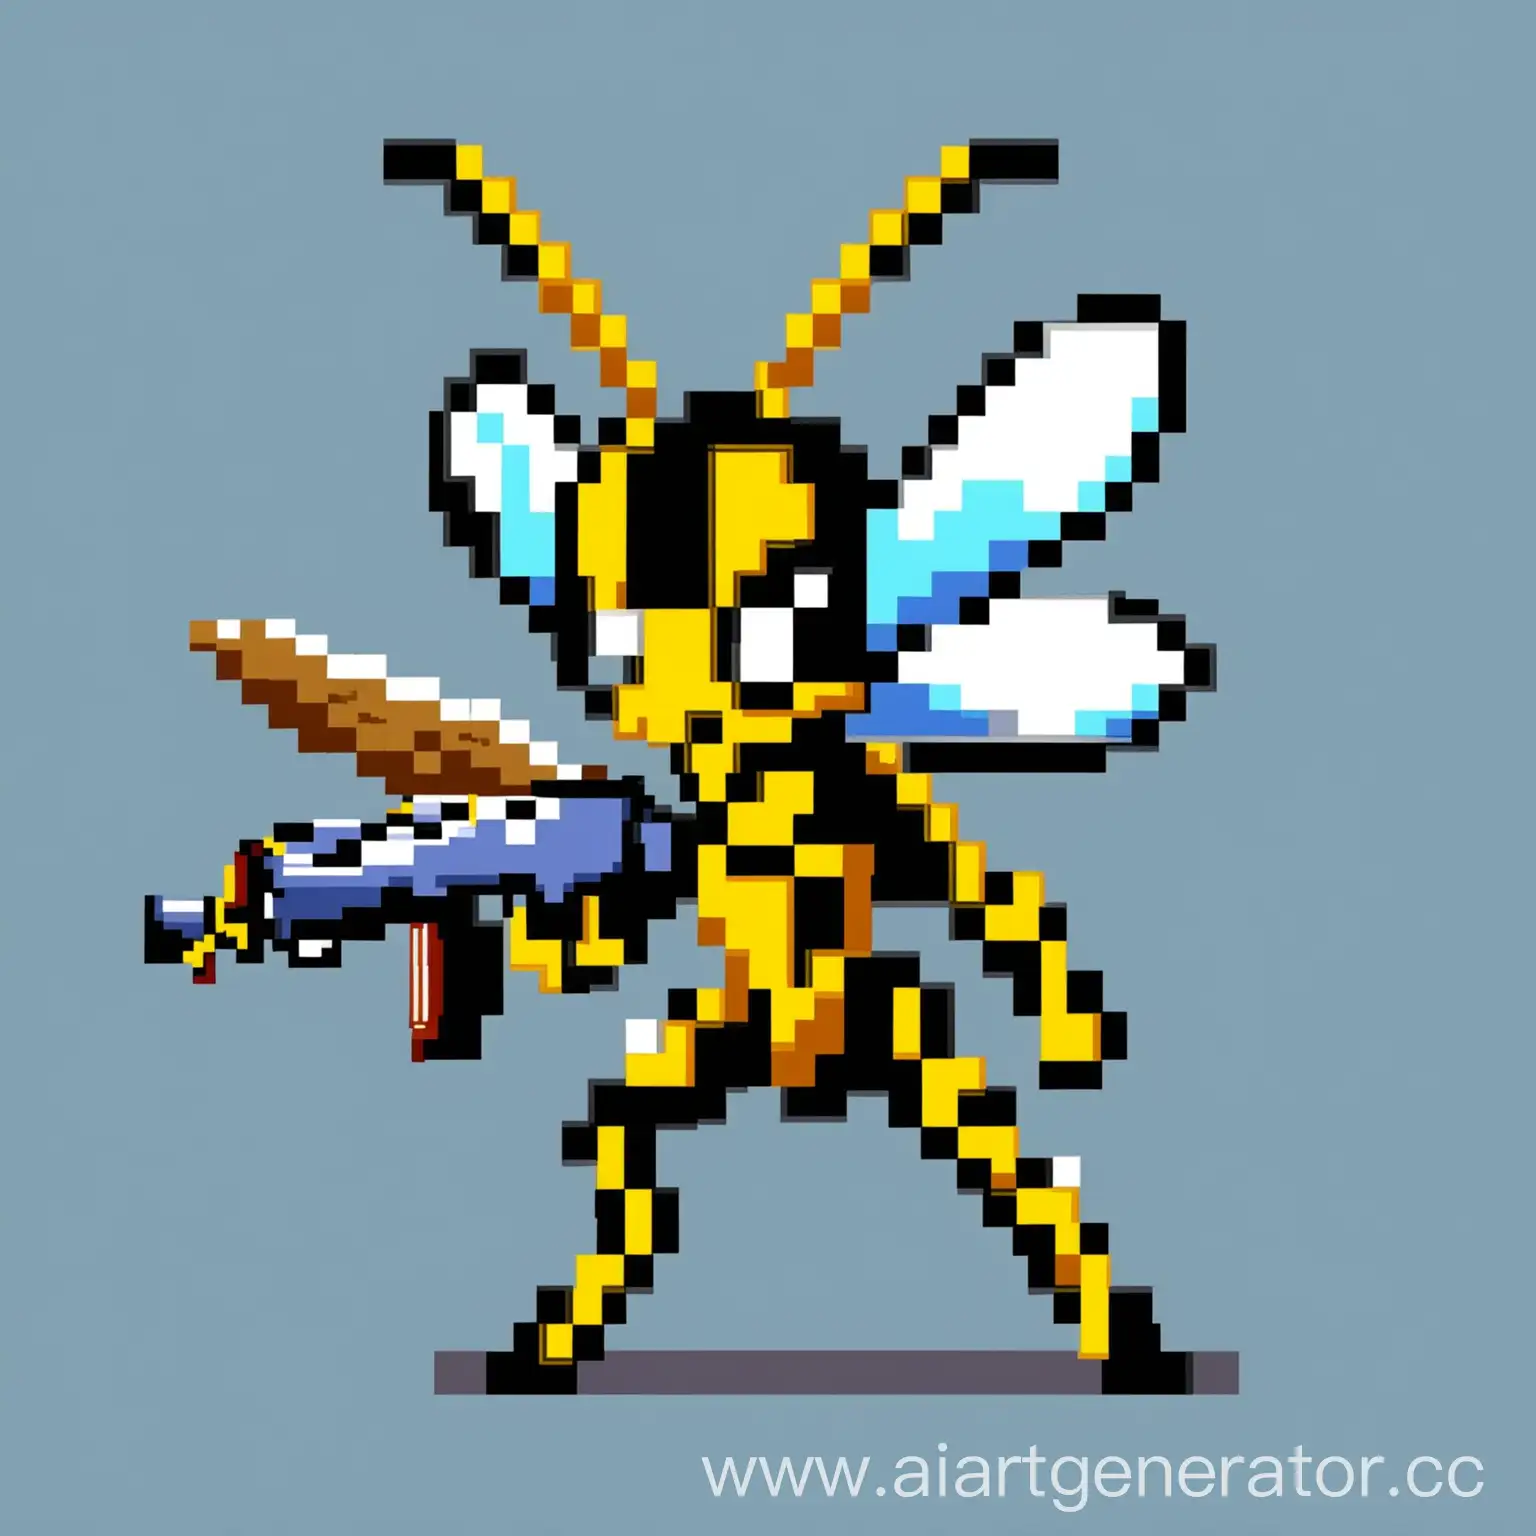 Pixelated-Cartoon-Wasp-with-Rifle-Playful-Insect-Armed-for-Adventure